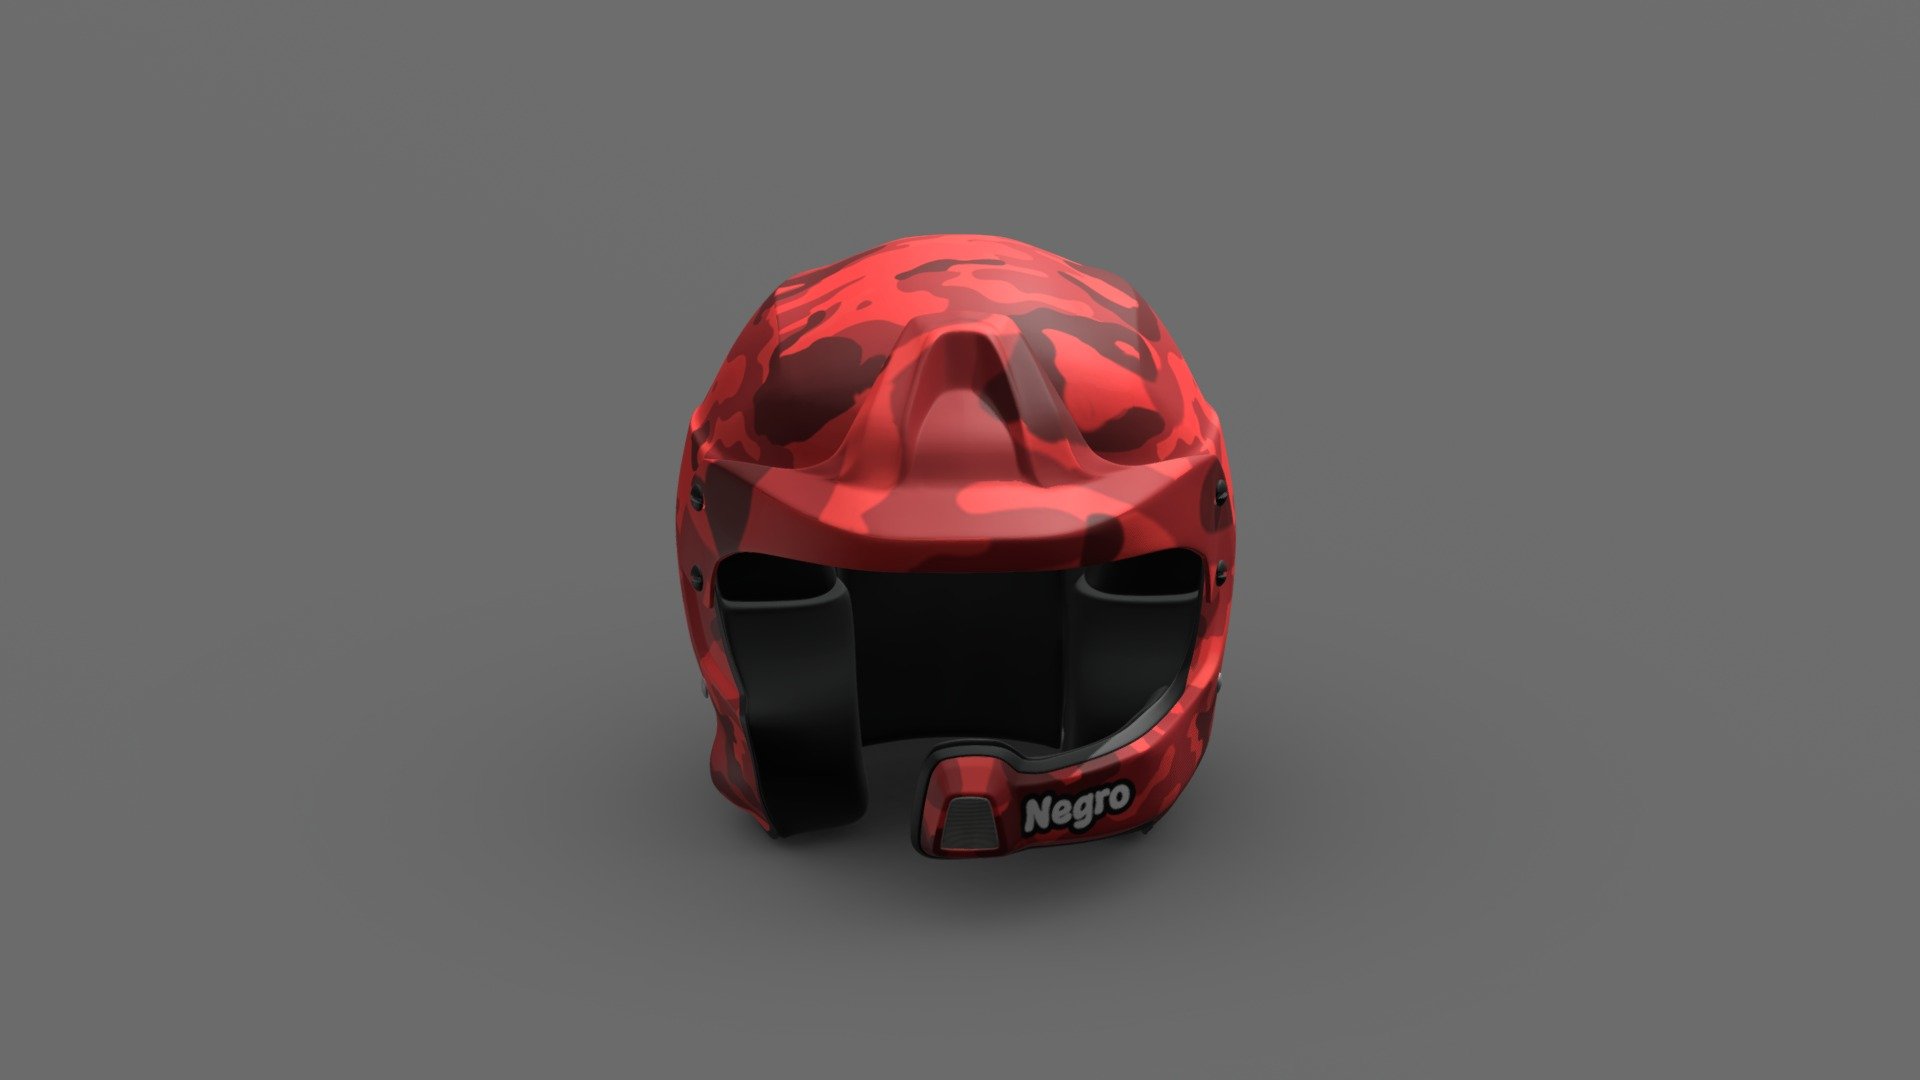 Racing helmet.
Stilo WRC des helmet
Rally helmet for wrapping.
IF YOU WANT TO GET THIS MODEL: facello.gonzalo@gmail.com - Stilo WRC DES / Helmet - 3D model by gfacello 3d model